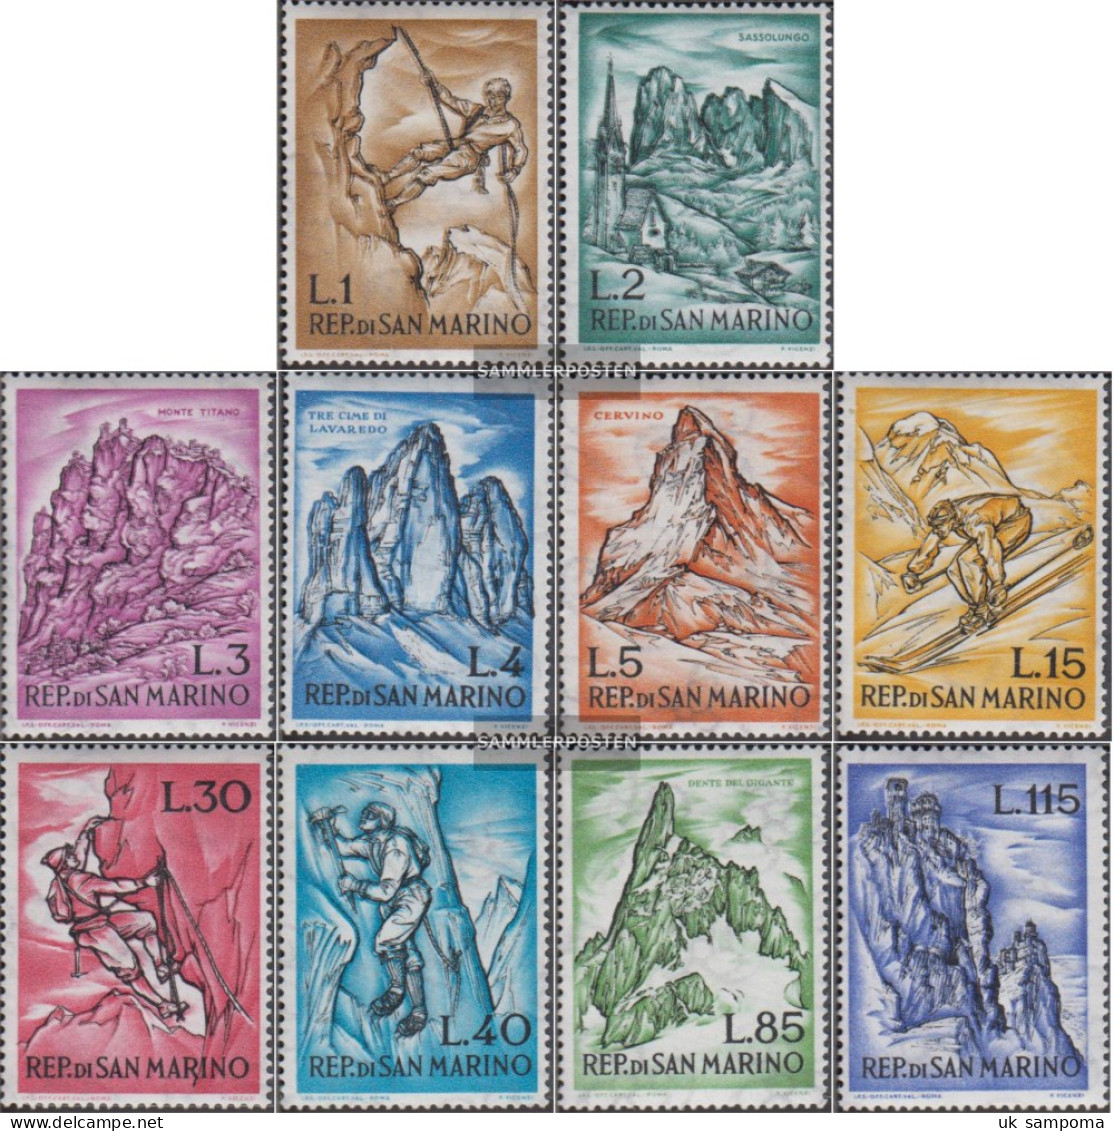 San Marino 729-738 (complete Issue) Unmounted Mint / Never Hinged 1962 Mountaineering - Nuovi